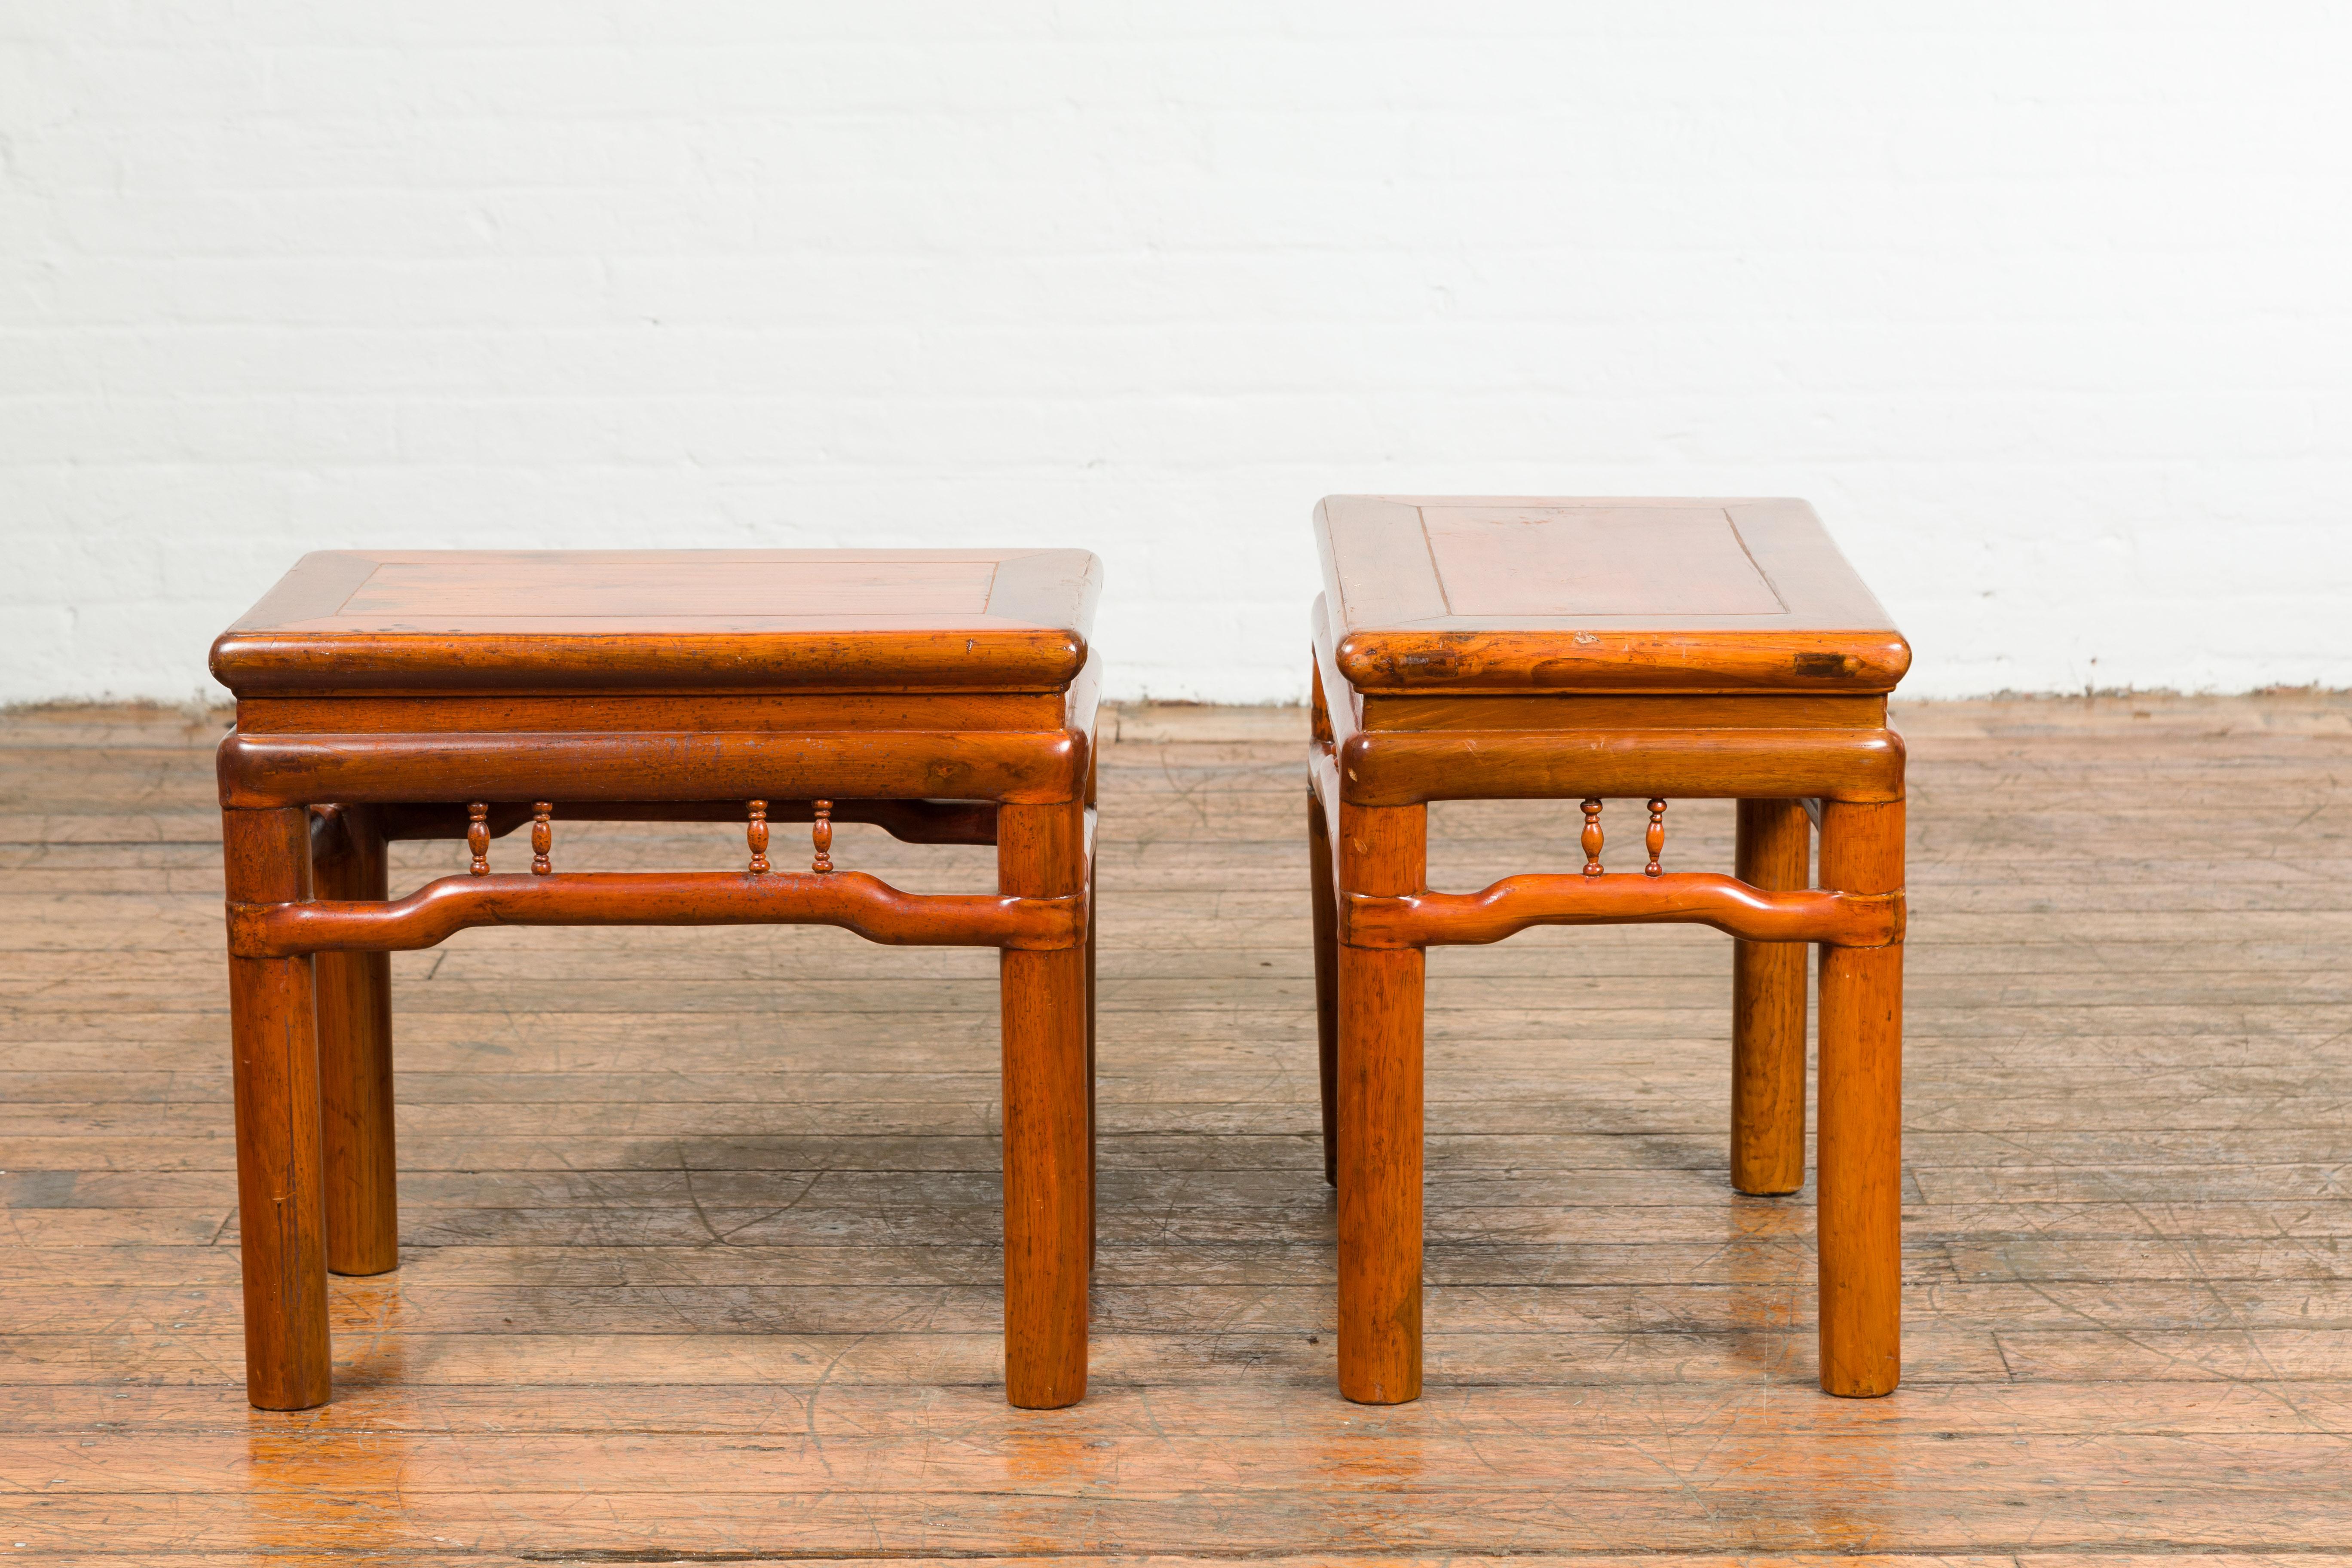 Pair of Chinese Qing Dynasty 19th Century Side Tables with Humpback Stretchers For Sale 4